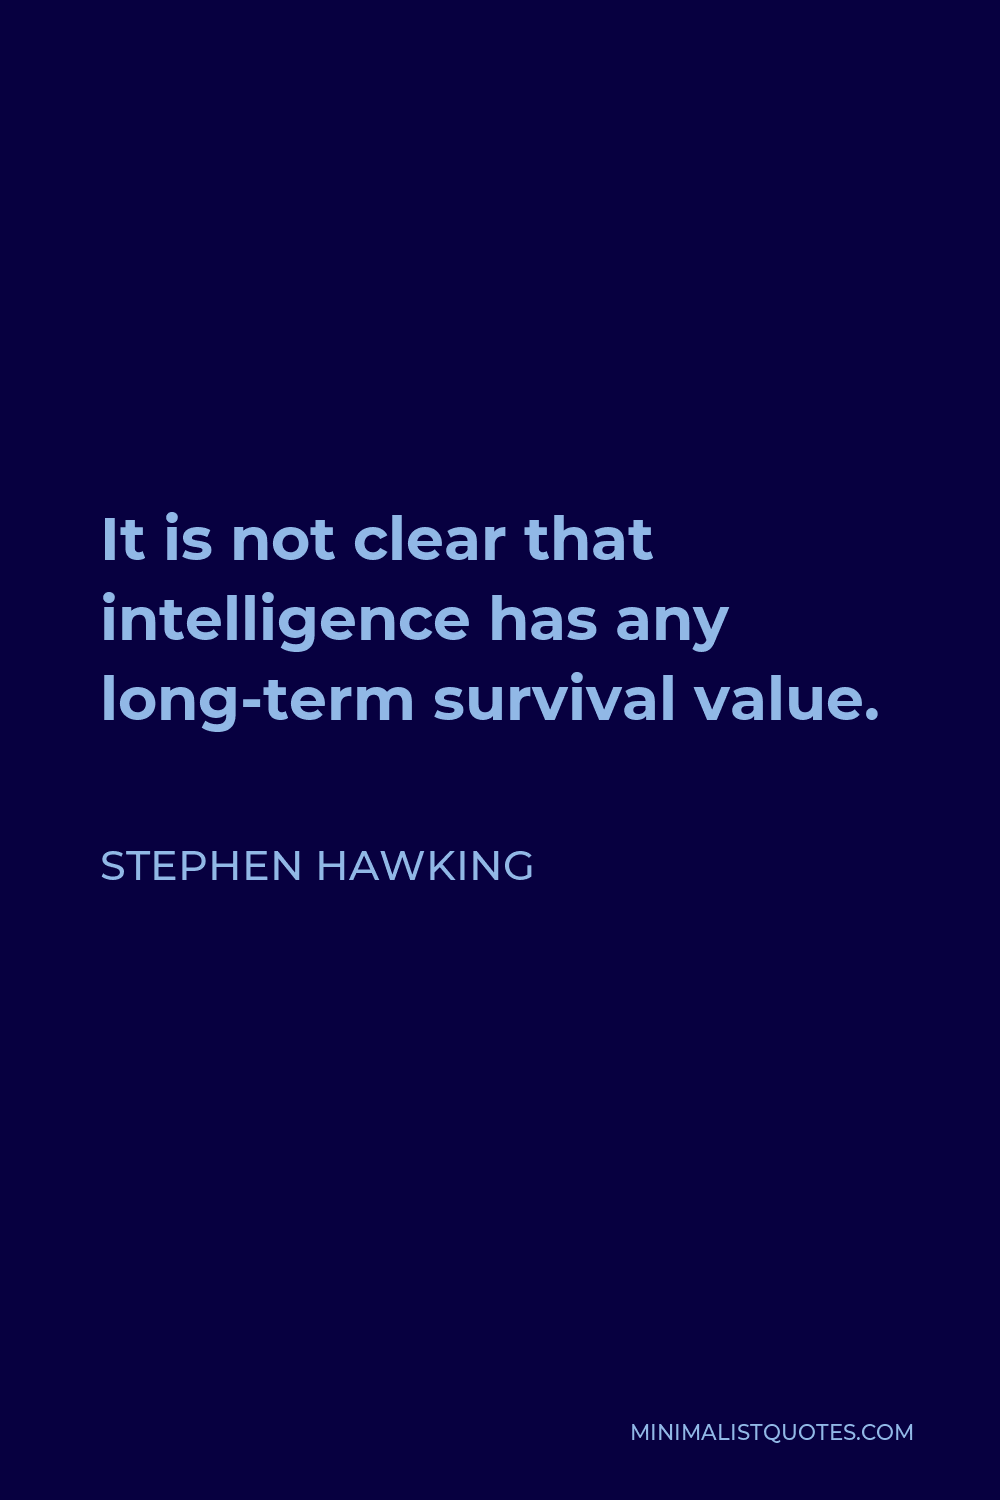 Stephen Hawking Quote - It is not clear that intelligence has any long-term survival value.